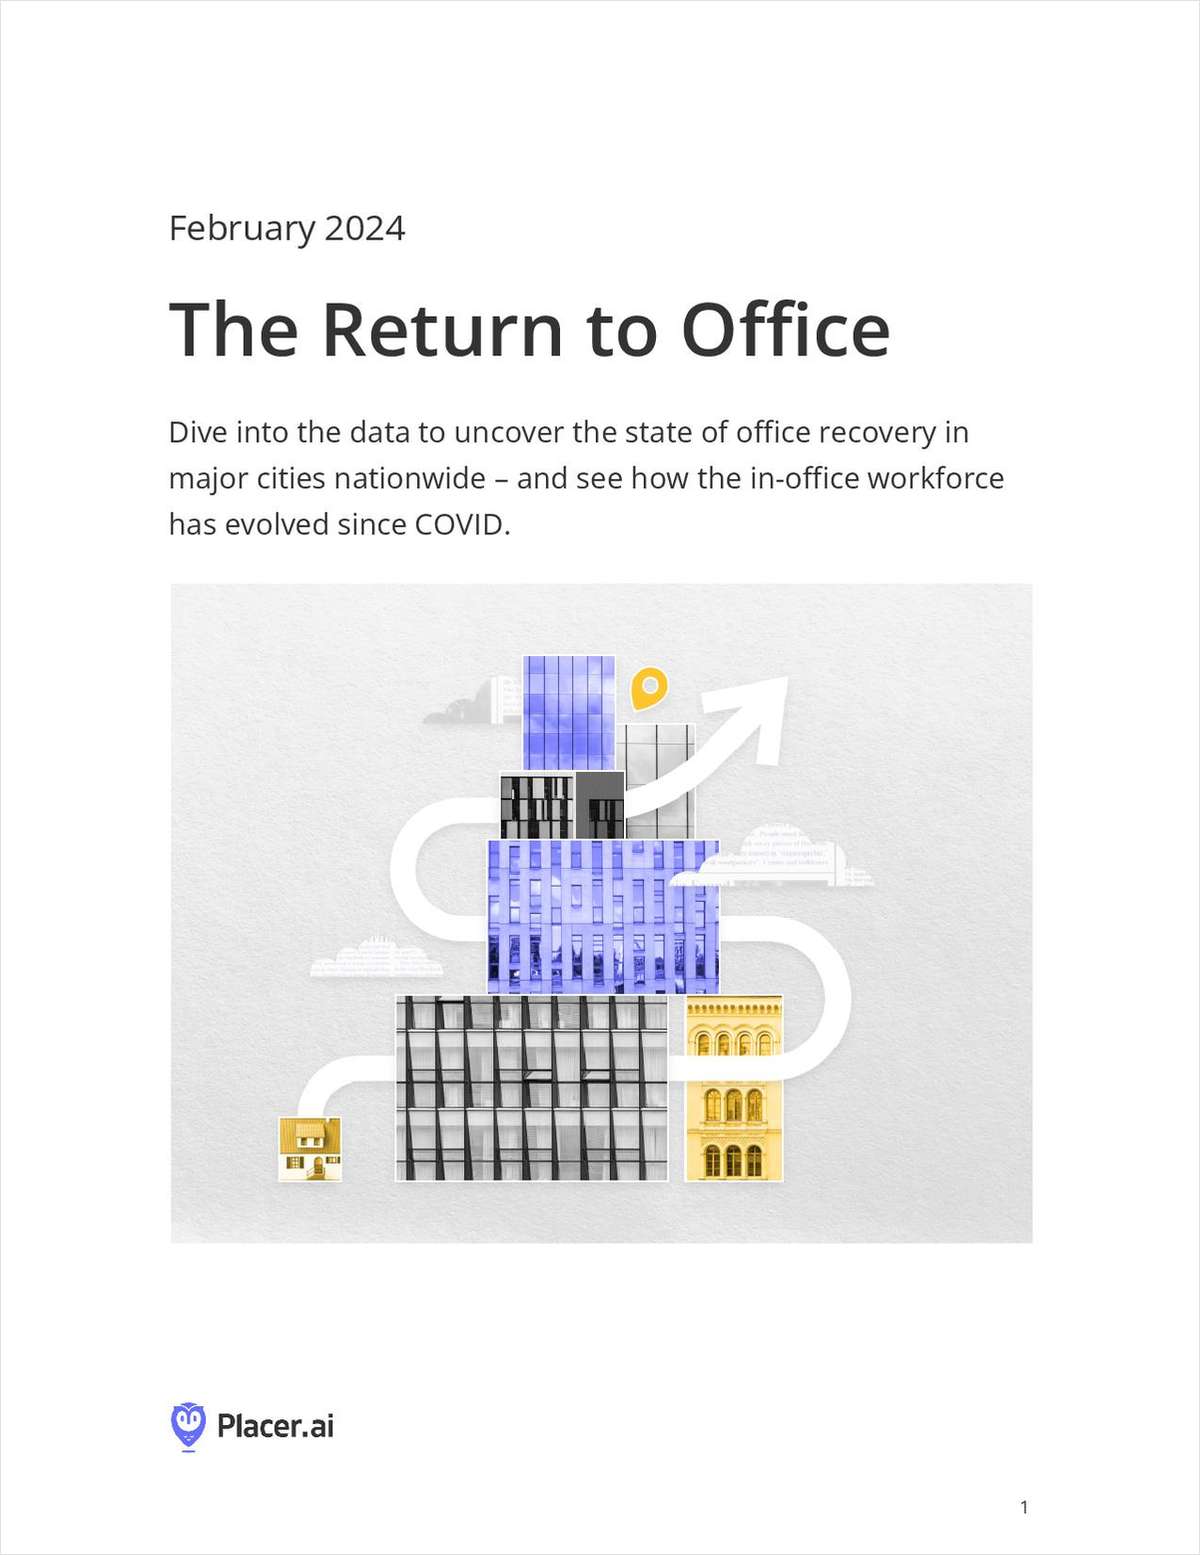 Office Recovery in Major Cities: Uncovering the State of Return to Office